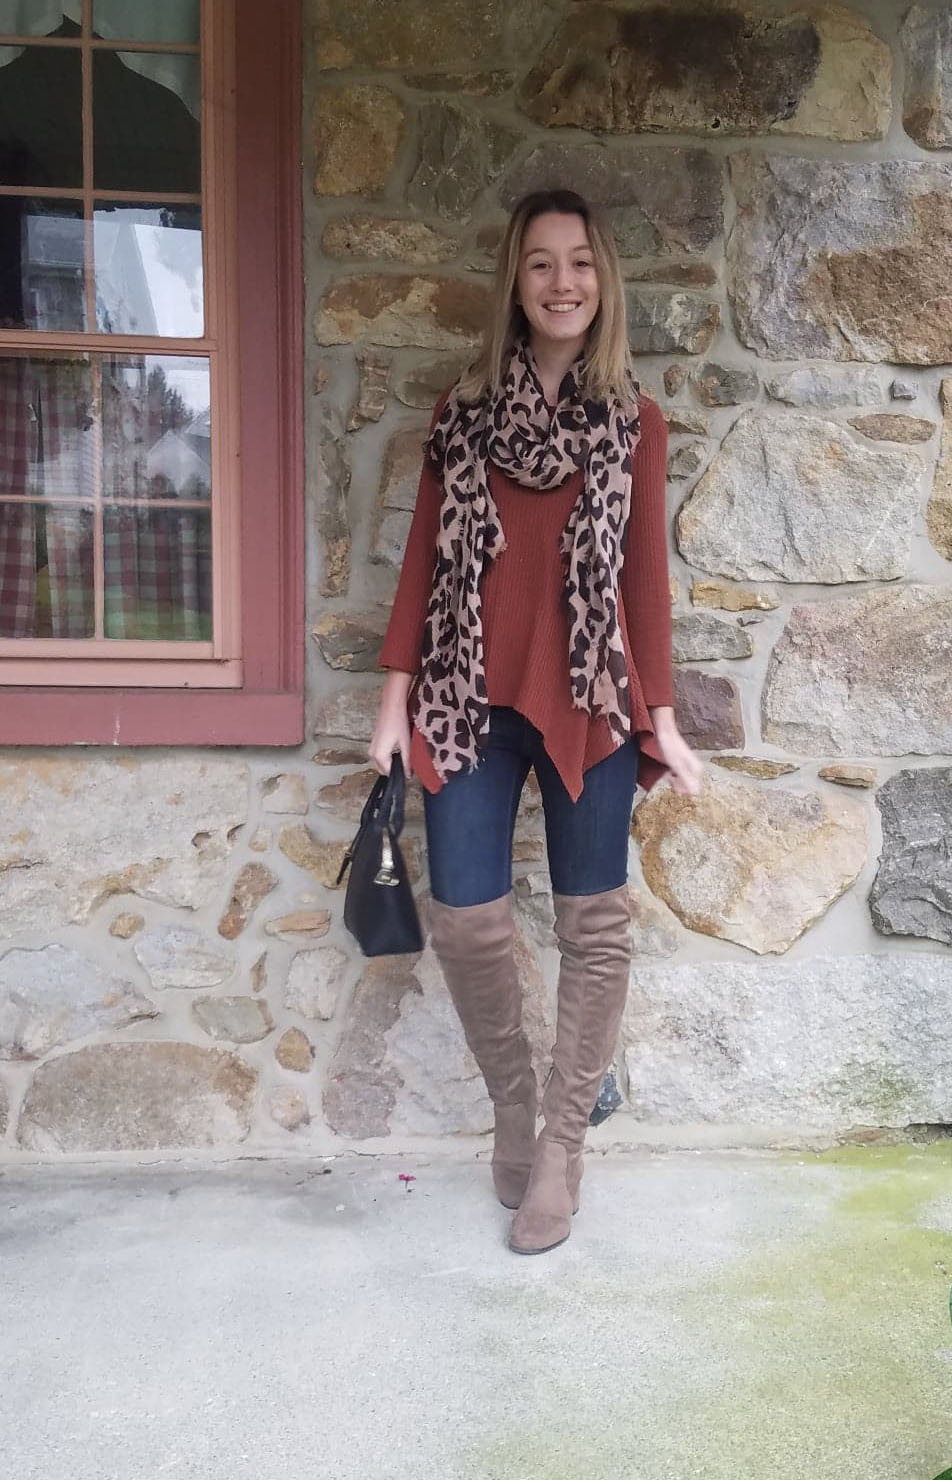 Linsdey Stout Cozy Stylist - wears leopard print scarf, copper coloured sweater and over the knee greige boots